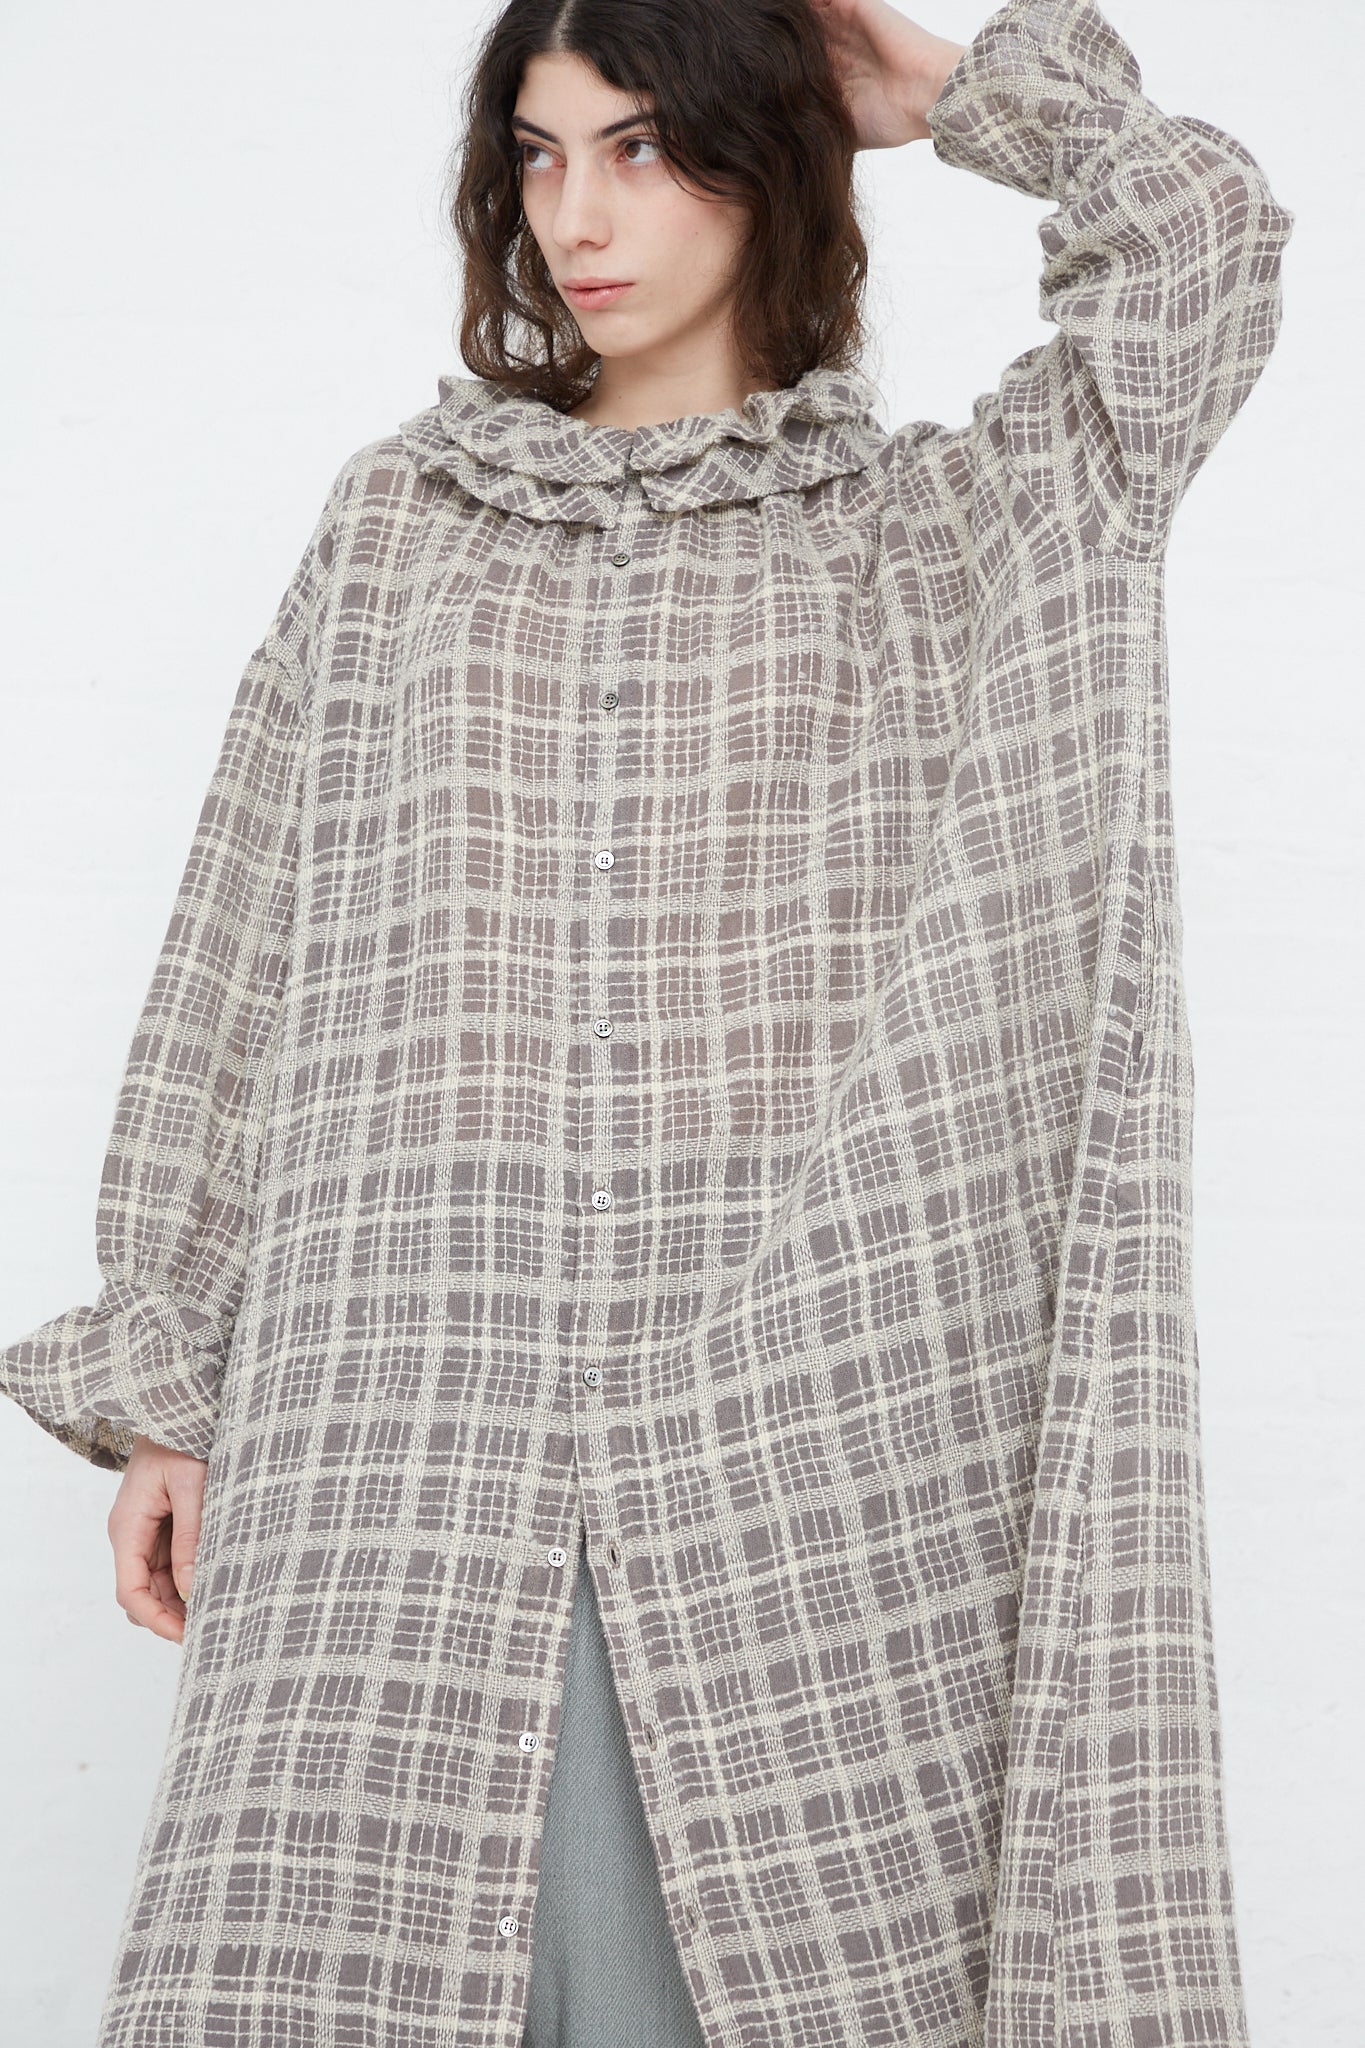 The model is wearing a Wool Check Frill Dress in Mocha by Ichi Antiquités.